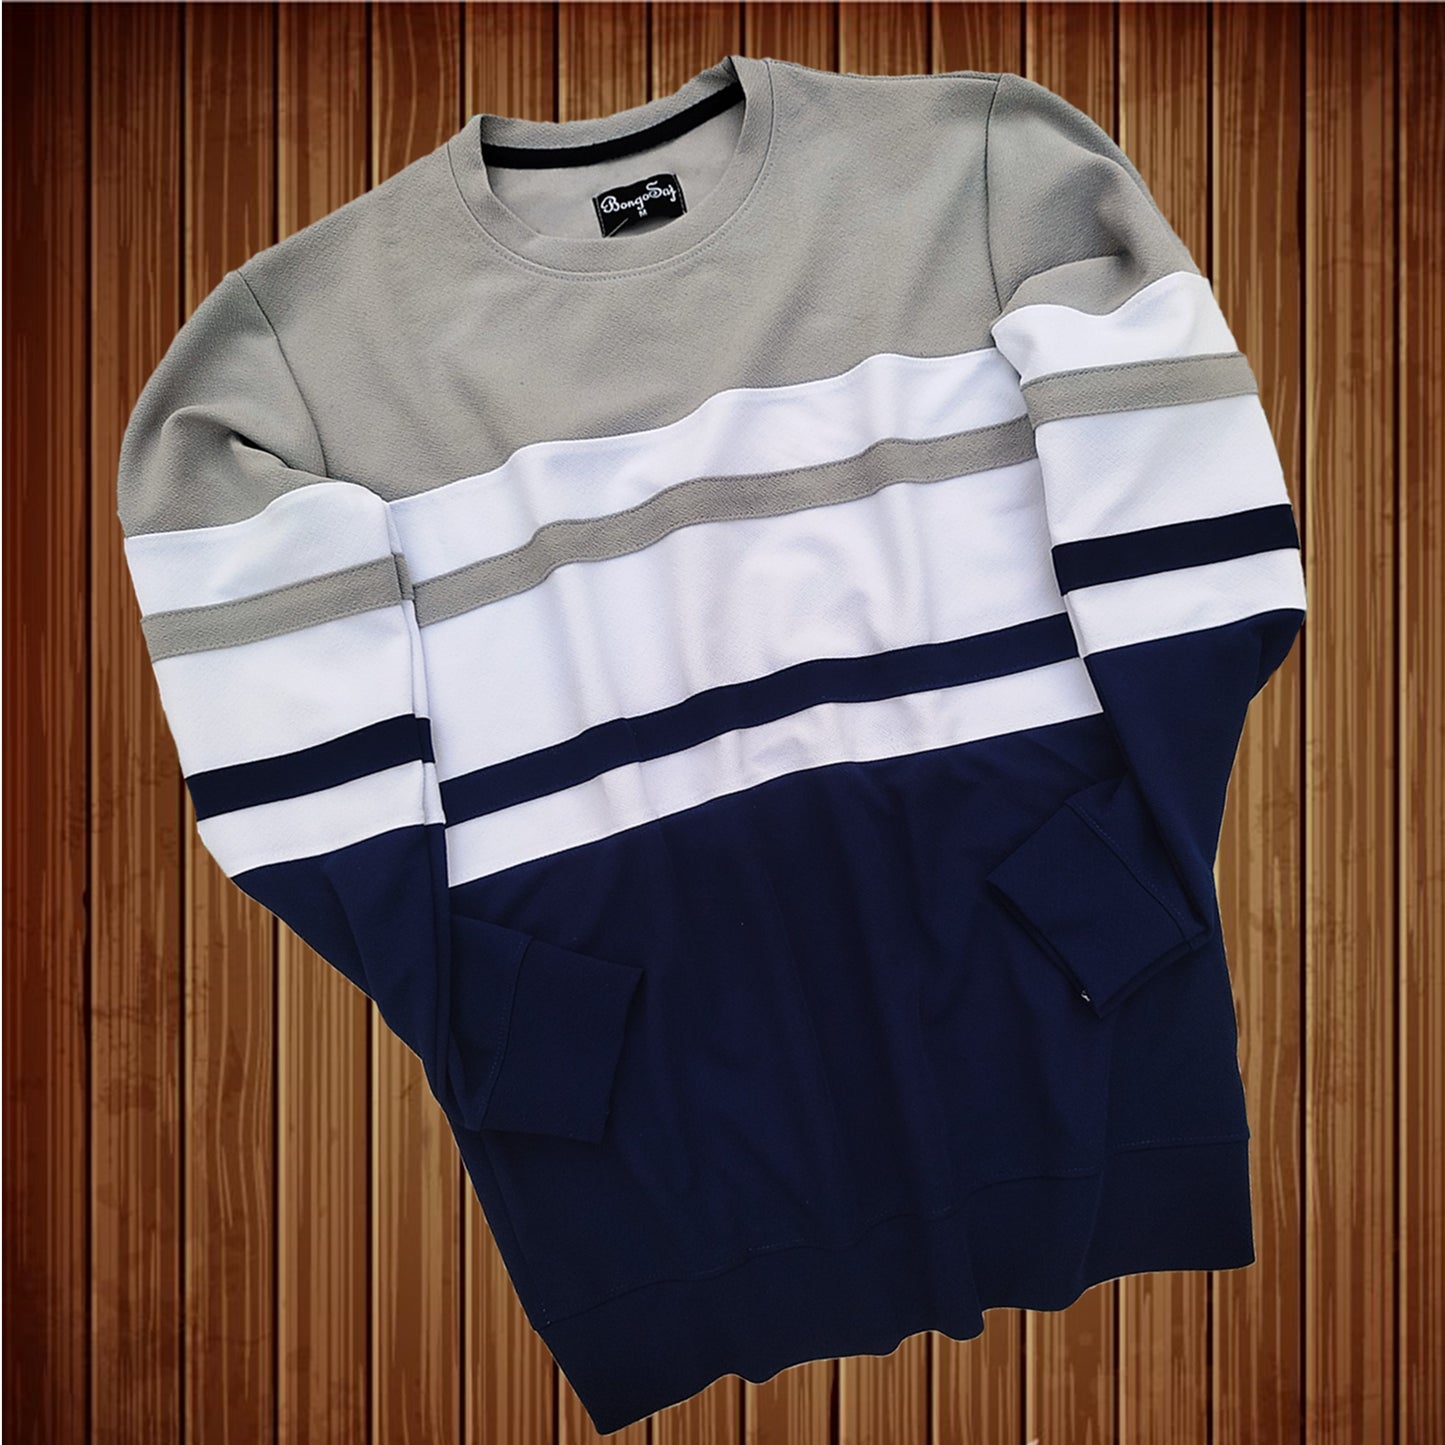 Full sleeve Lycra Steel Grey, White and Navy with two stripes